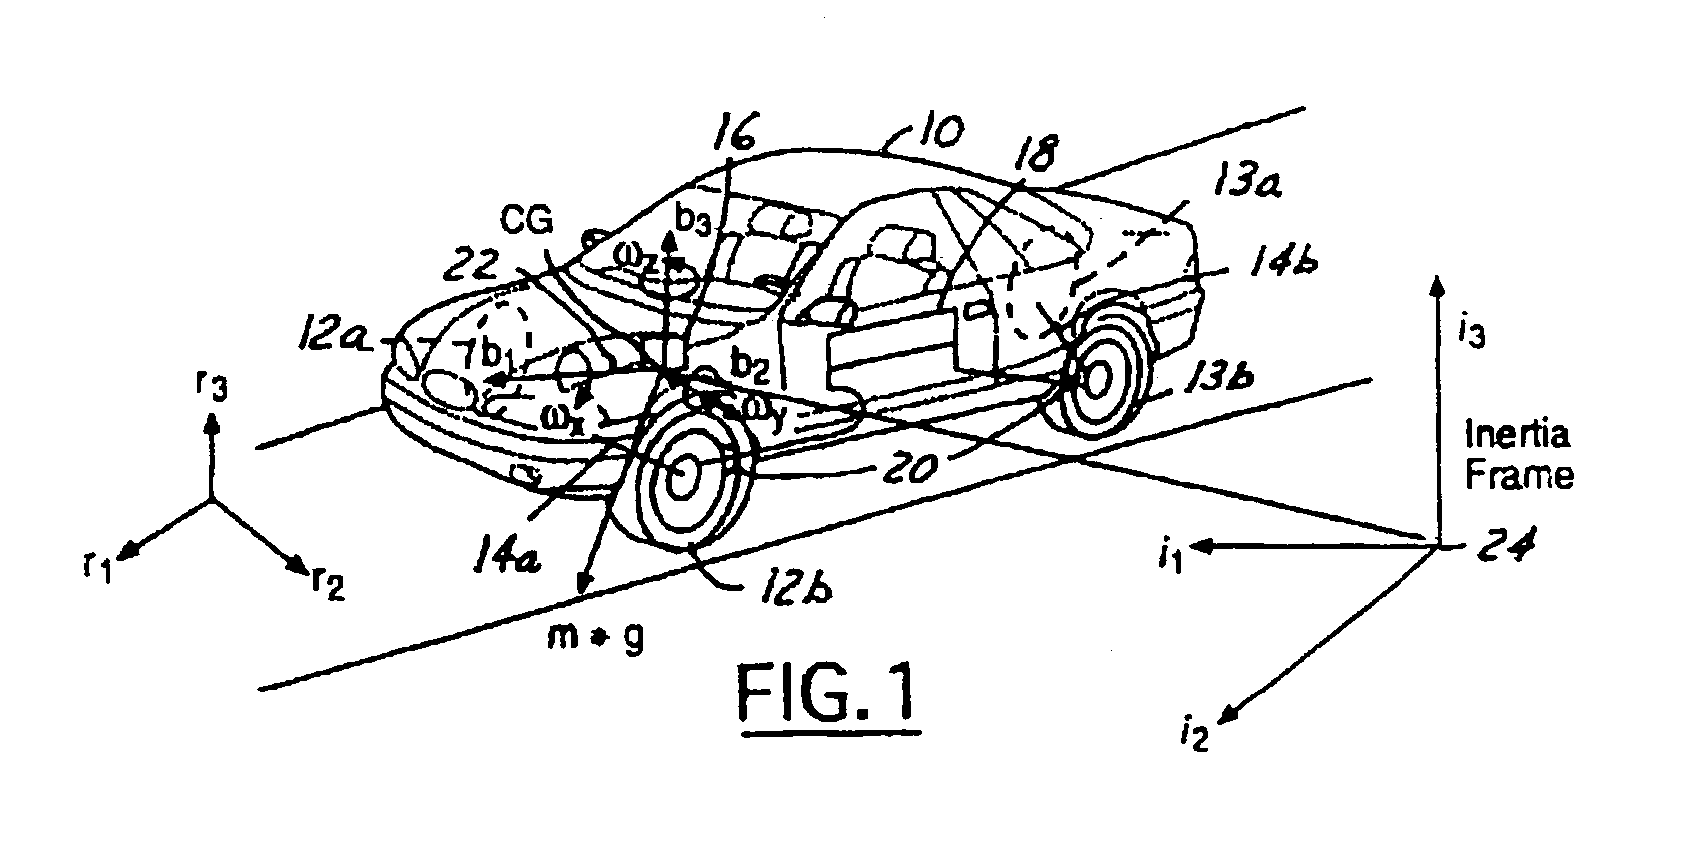 Wheel lift identification for an automotive vehicle using passive and active detection